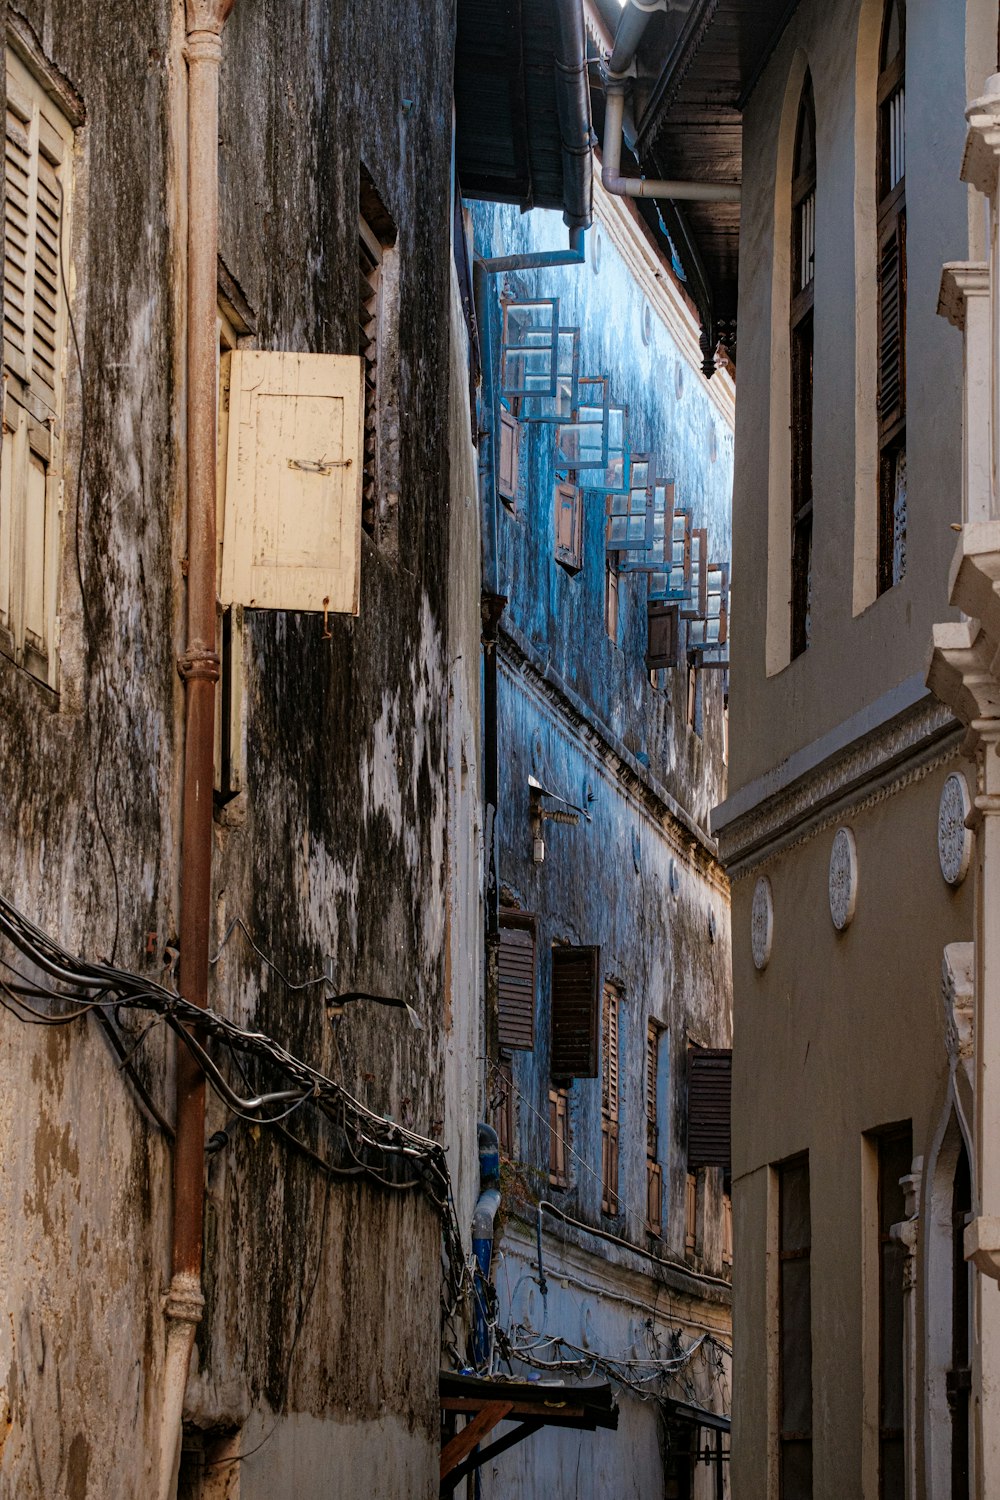 a narrow alley way with old buildings in the background